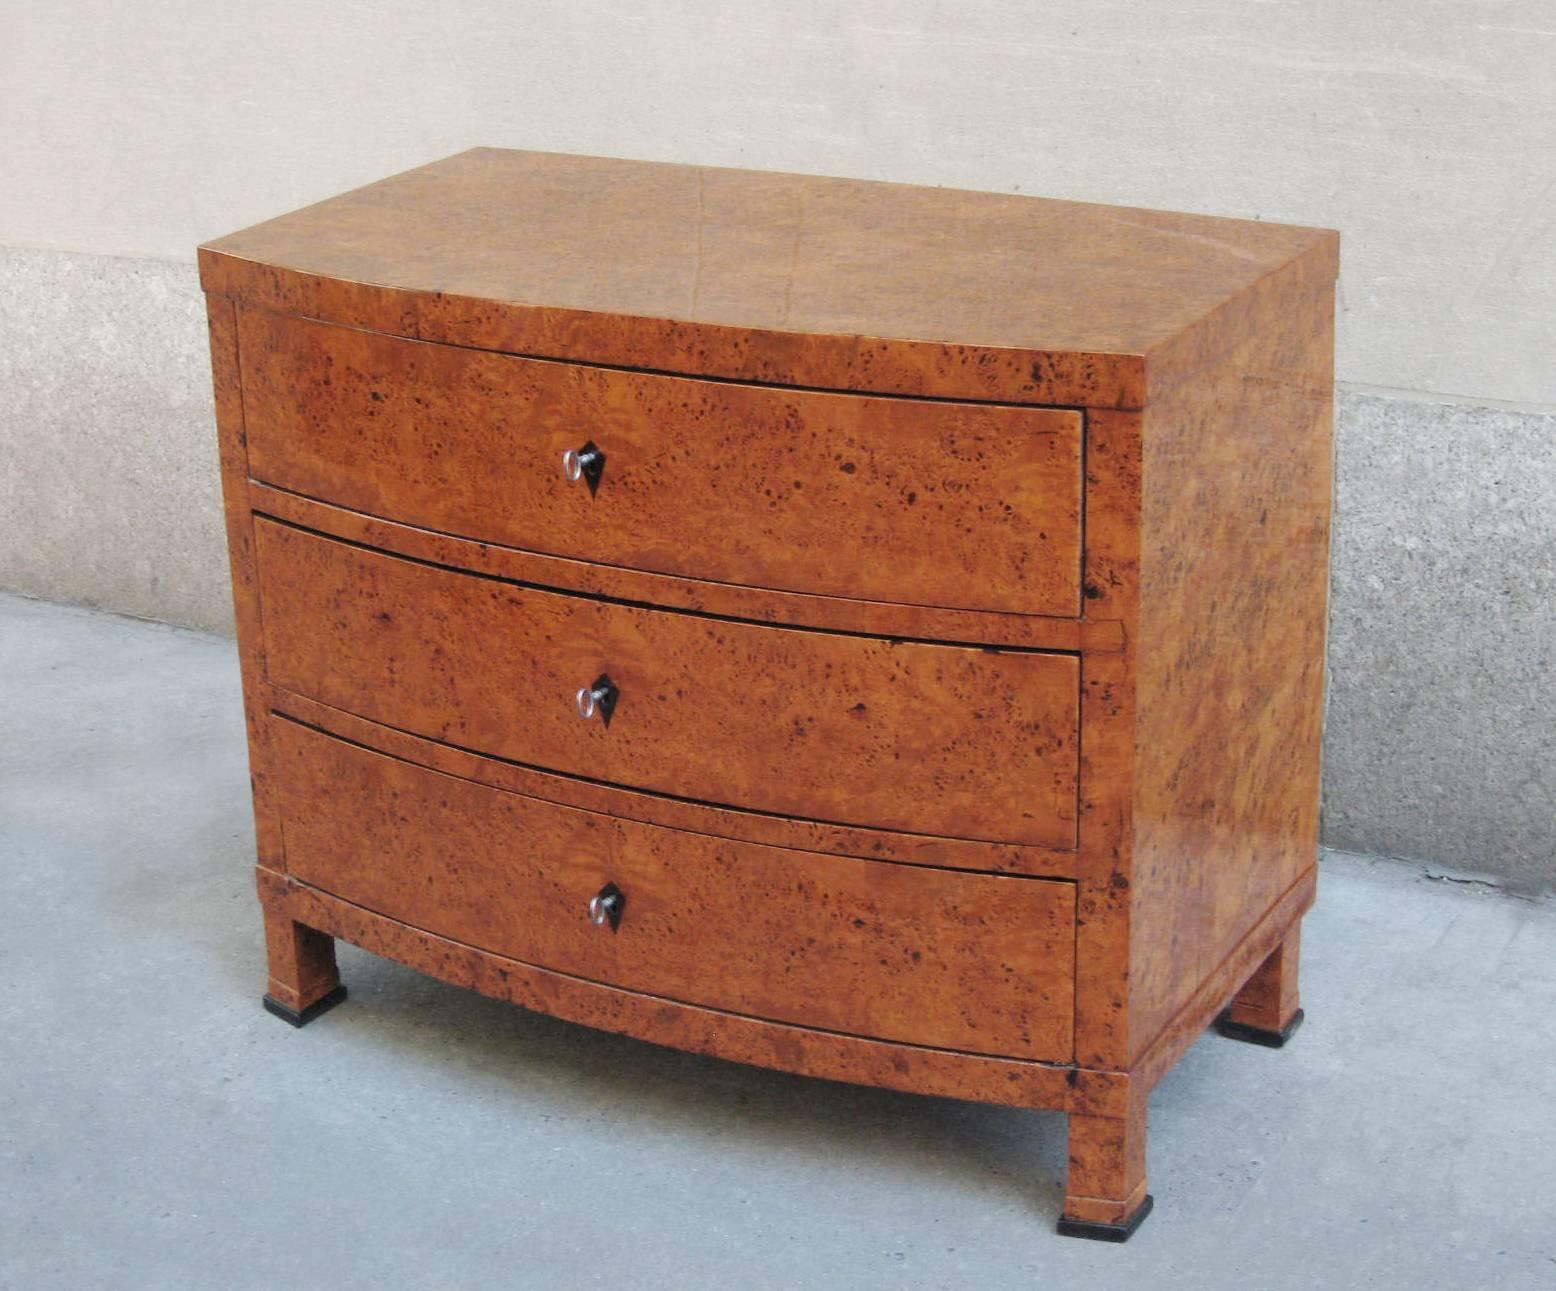 A fine neoclassical bow front chest of three drawers.
Karelian birch with ebonized details and keyholes.